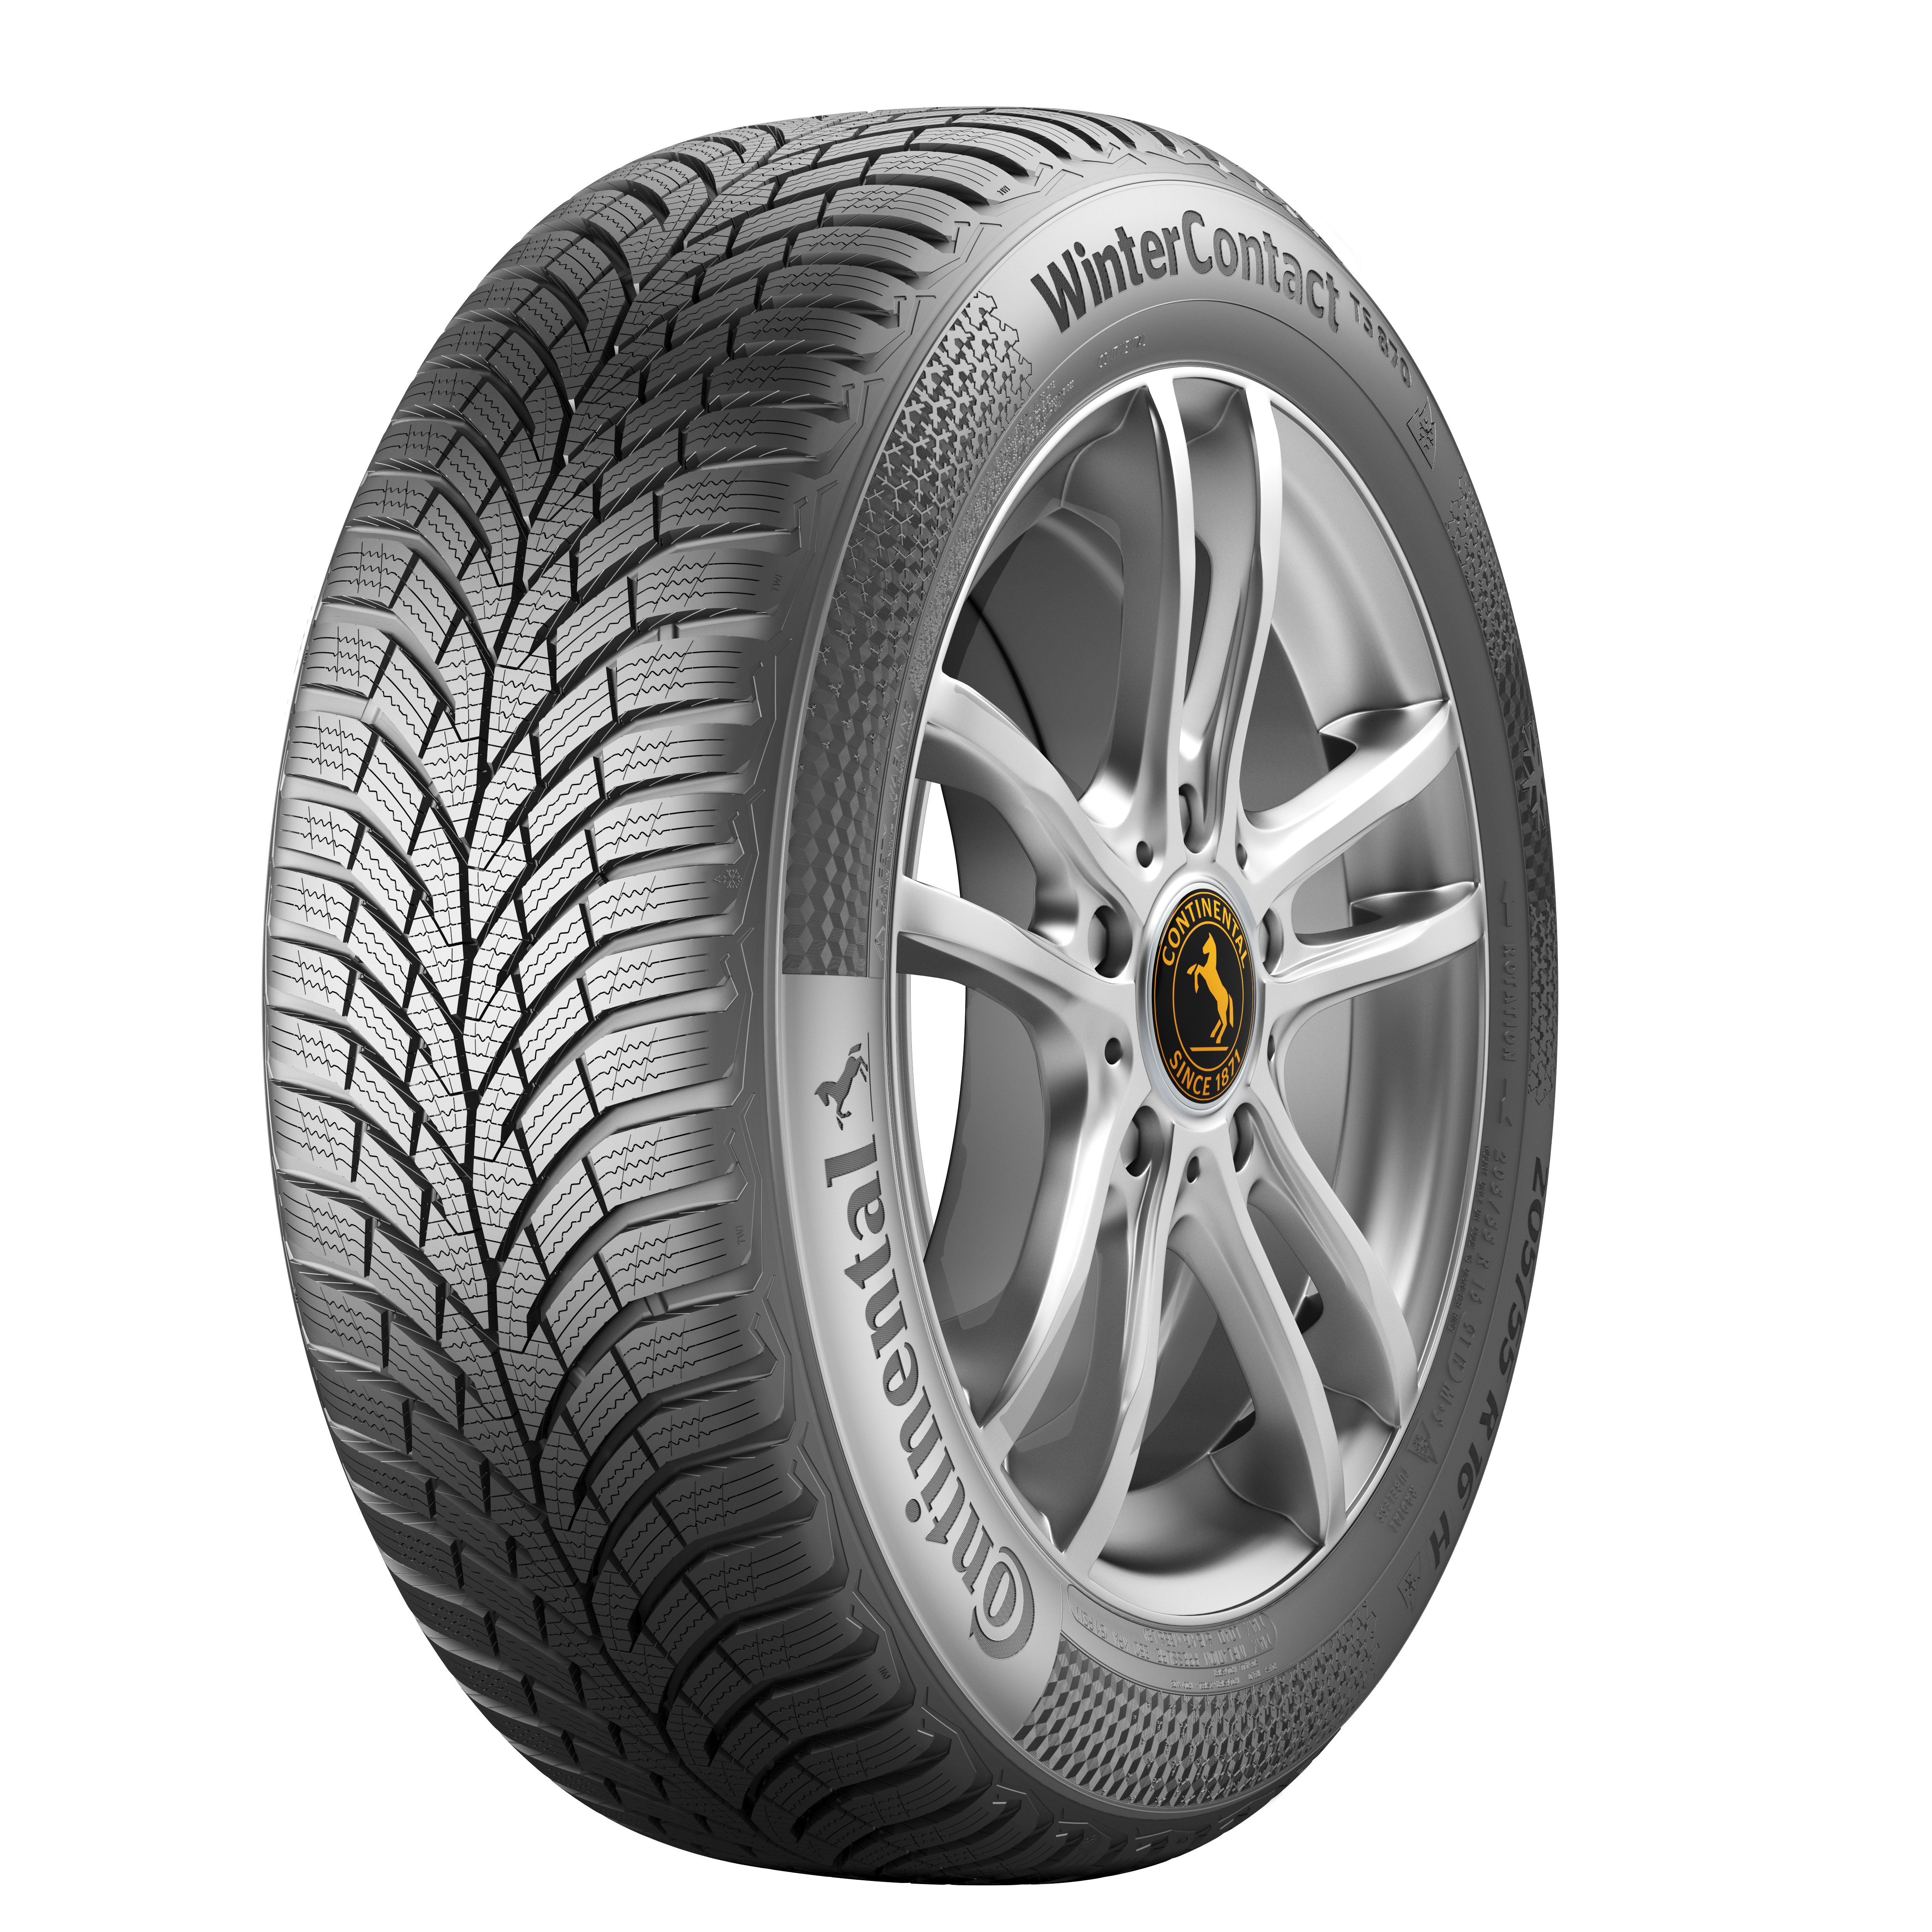 Continental with Top Rating in ADAC 2023 Winter Tire Test - Continental AG